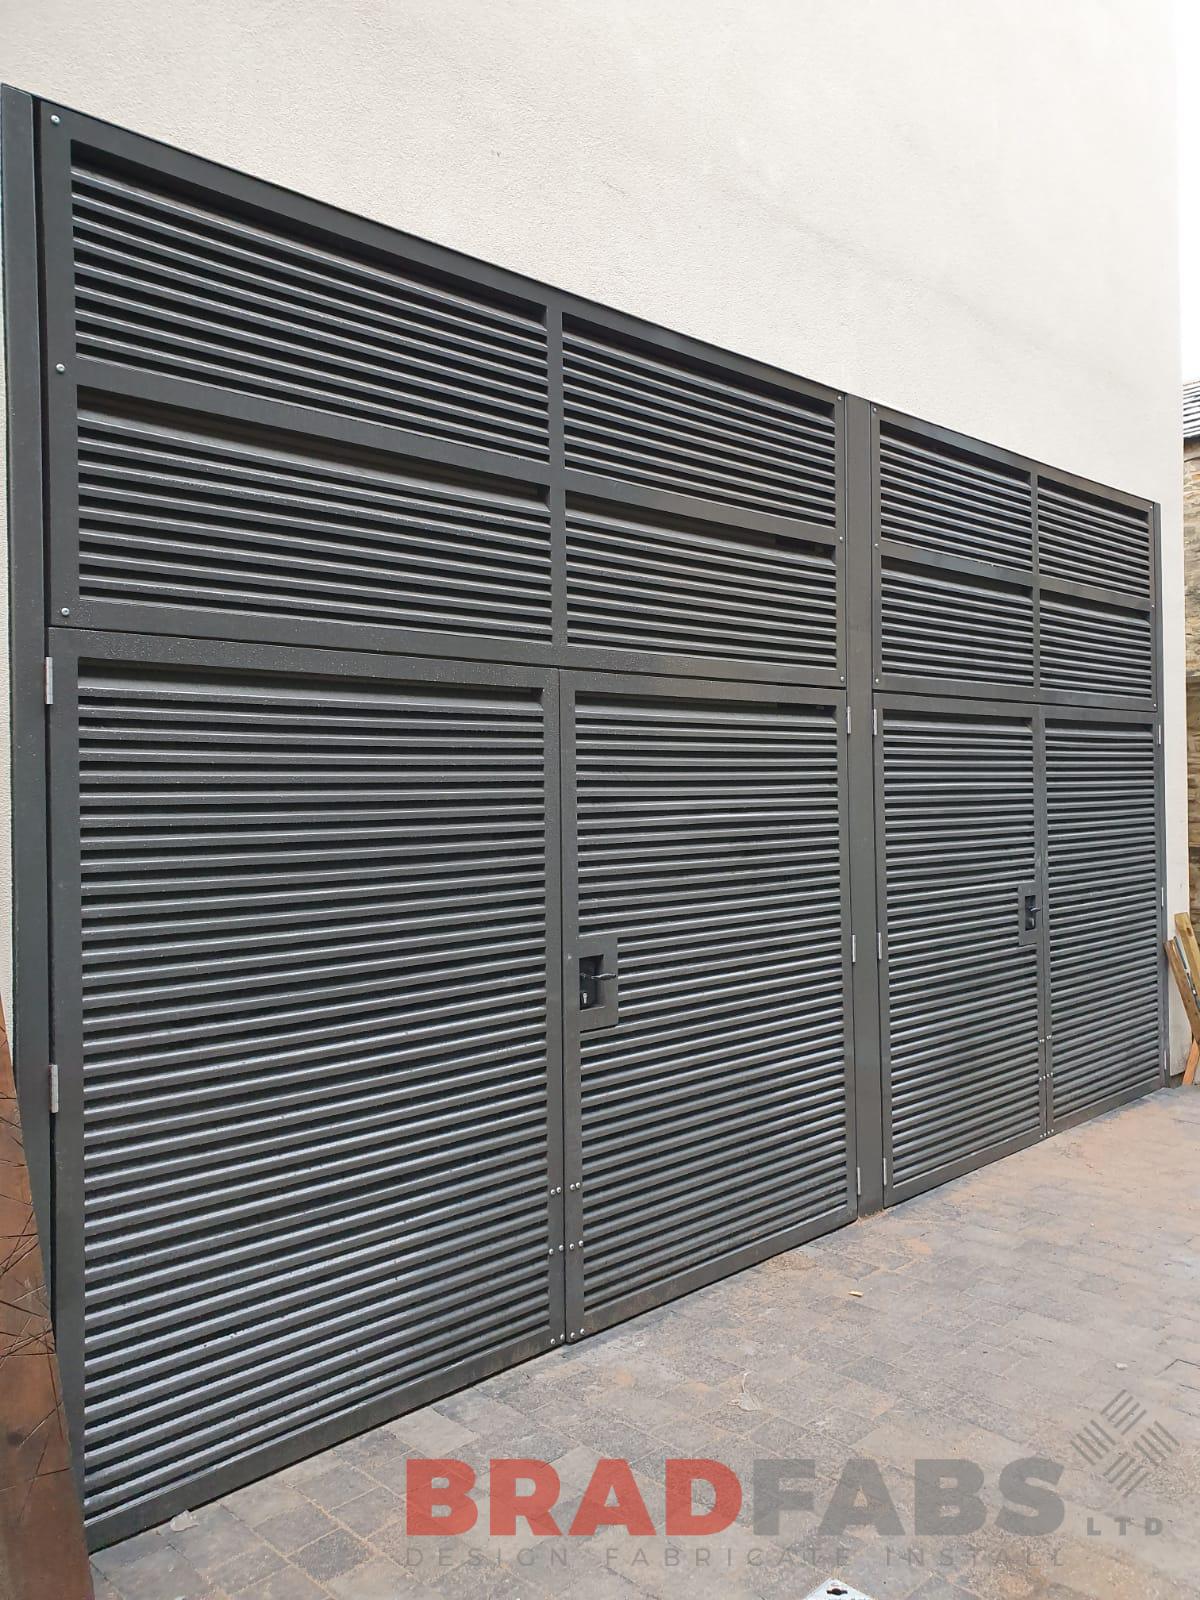 Bradfabs, bespoke steel gates for commercial company